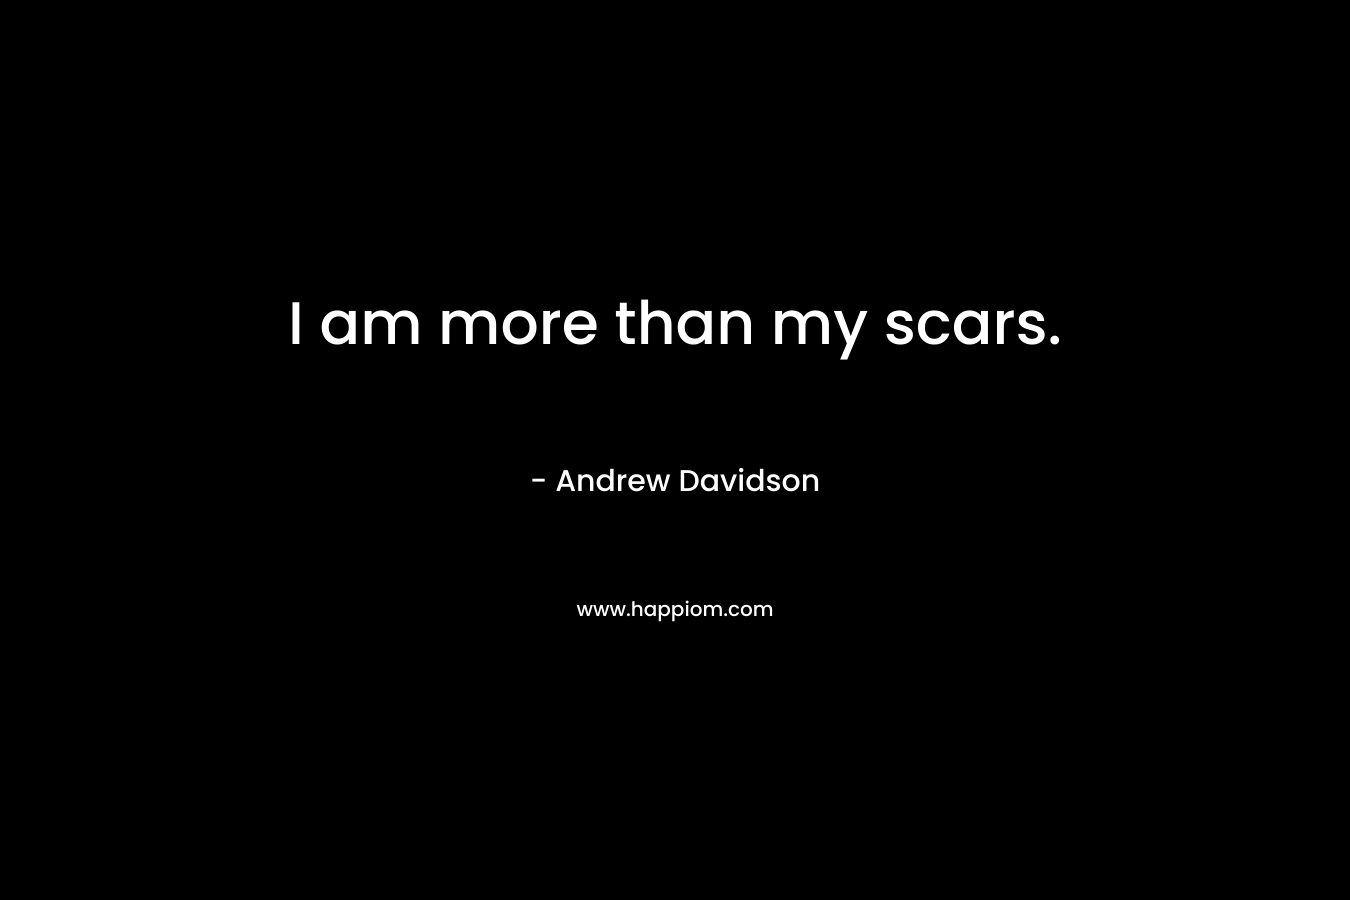 I am more than my scars.